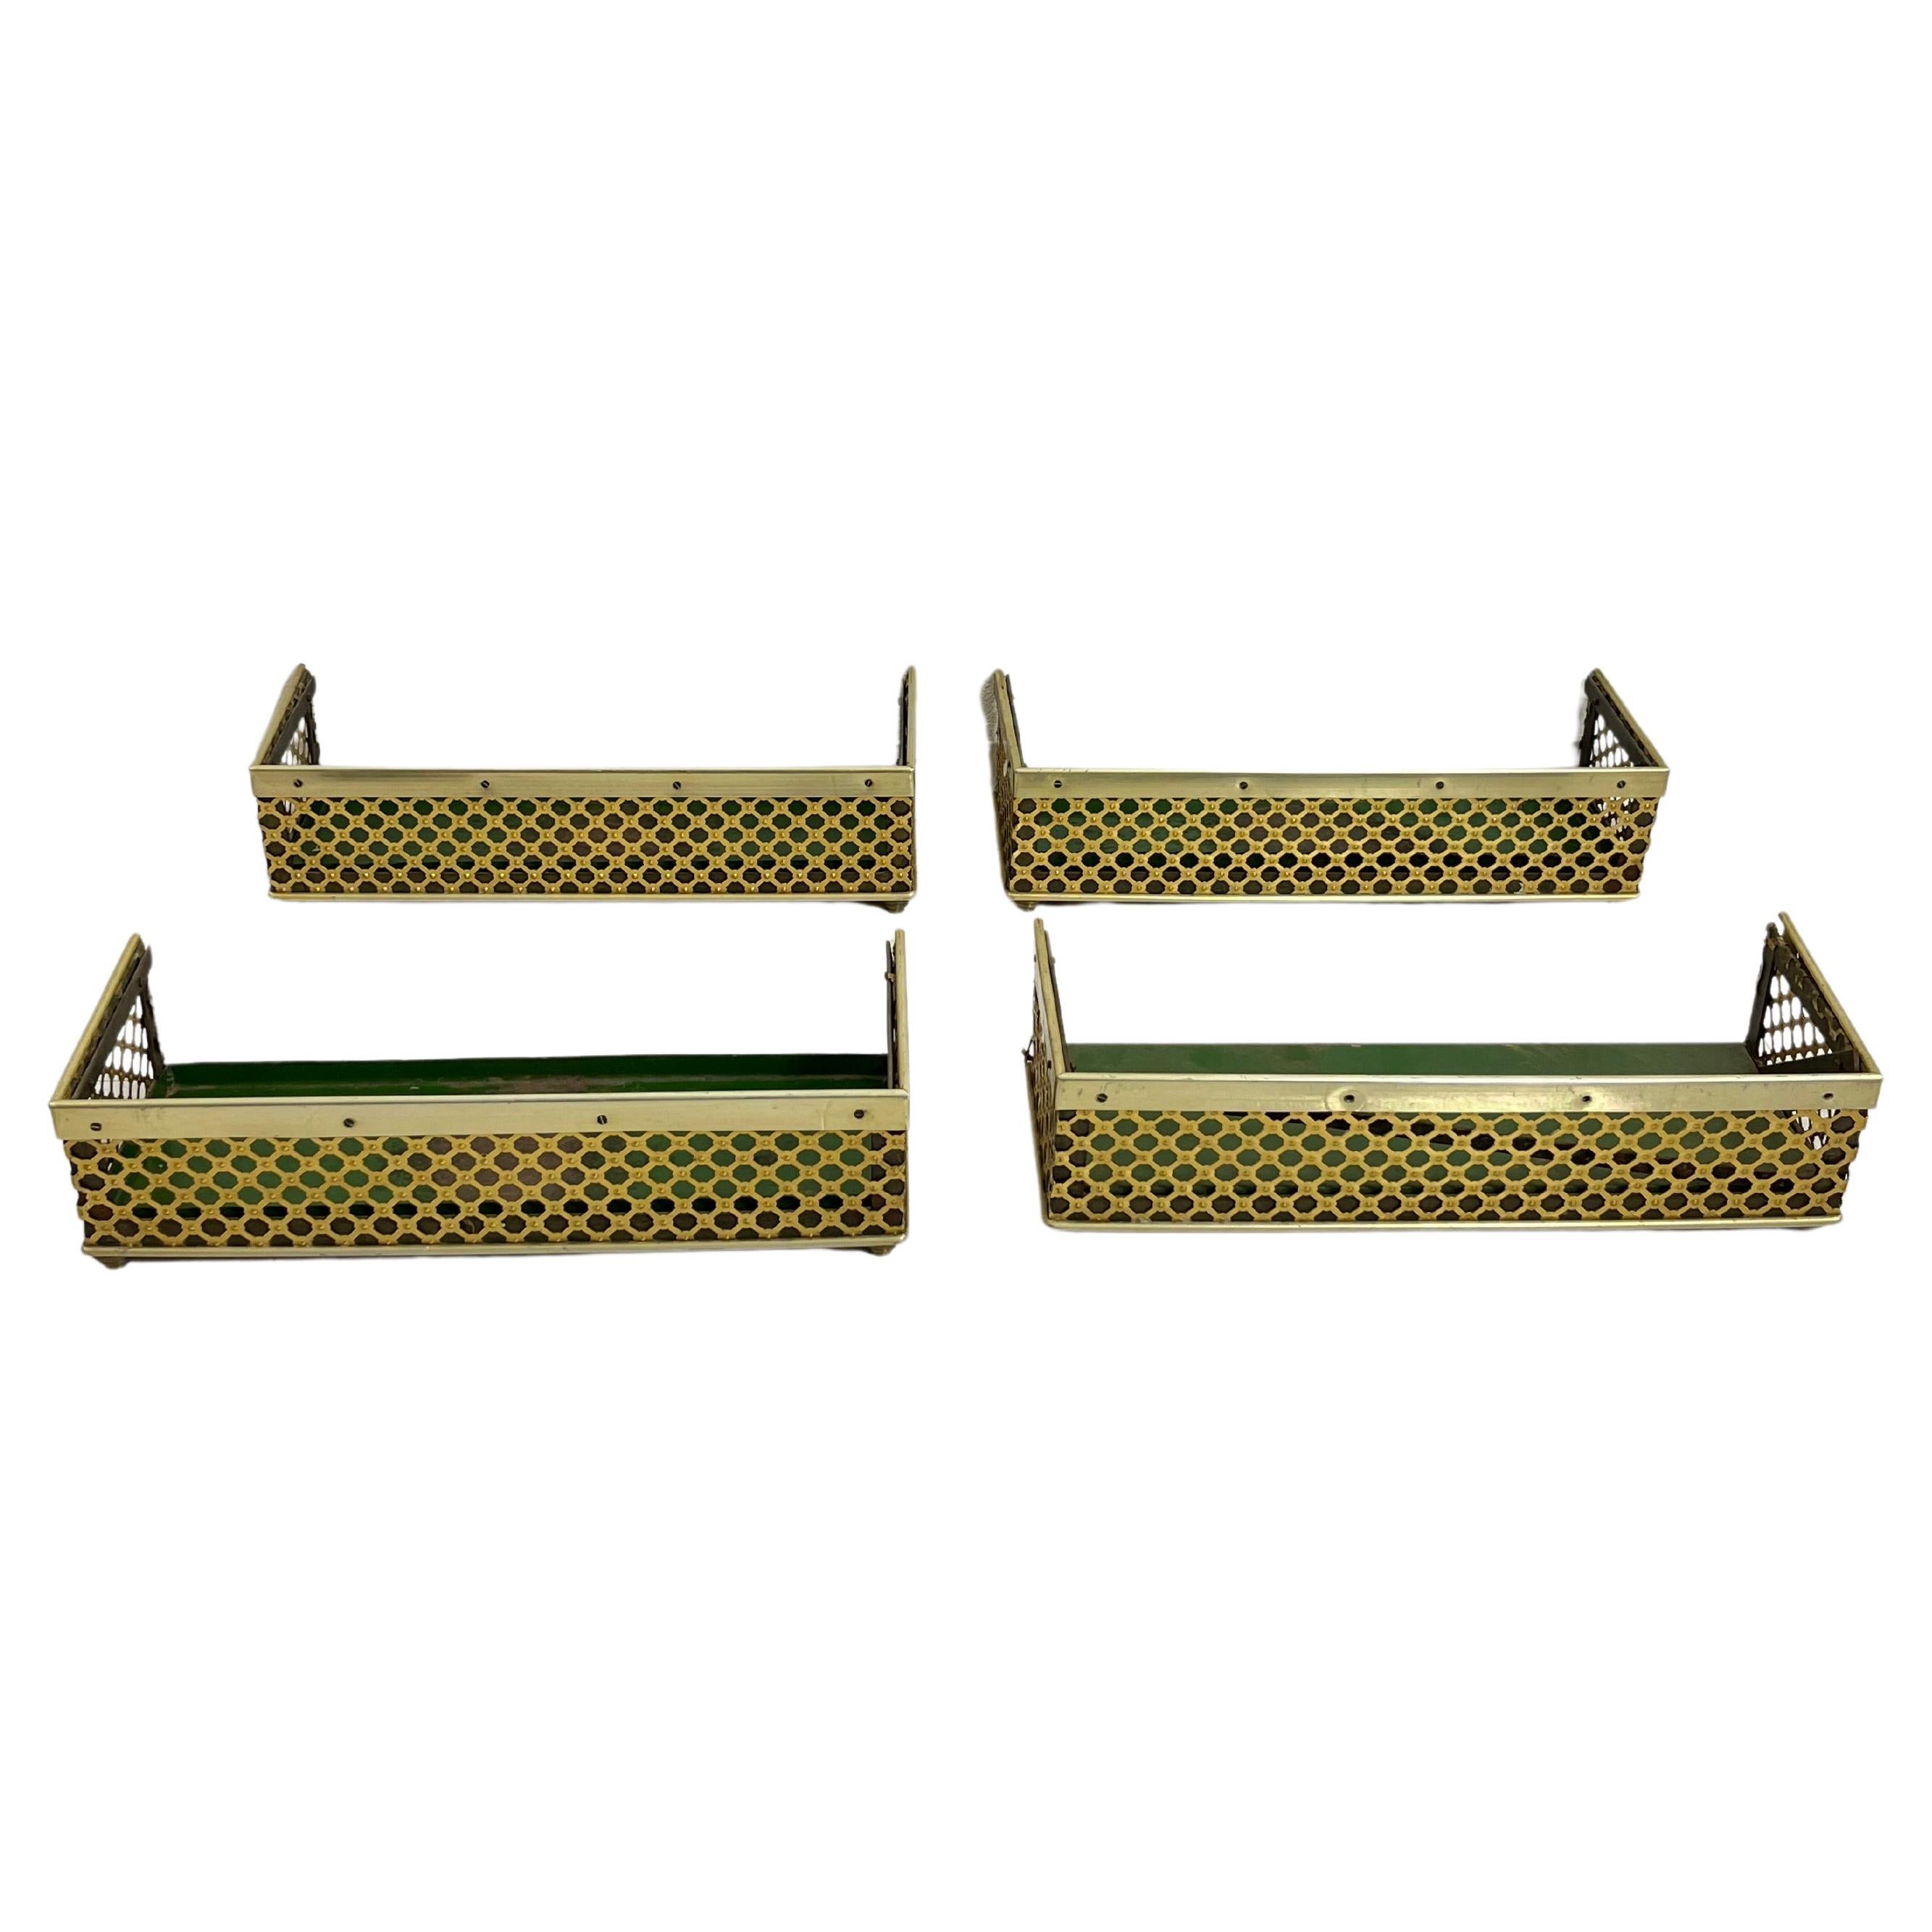 Set of 4 Mid-Century Brass-Covered Planters Attributed to Gio Ponti 1950s